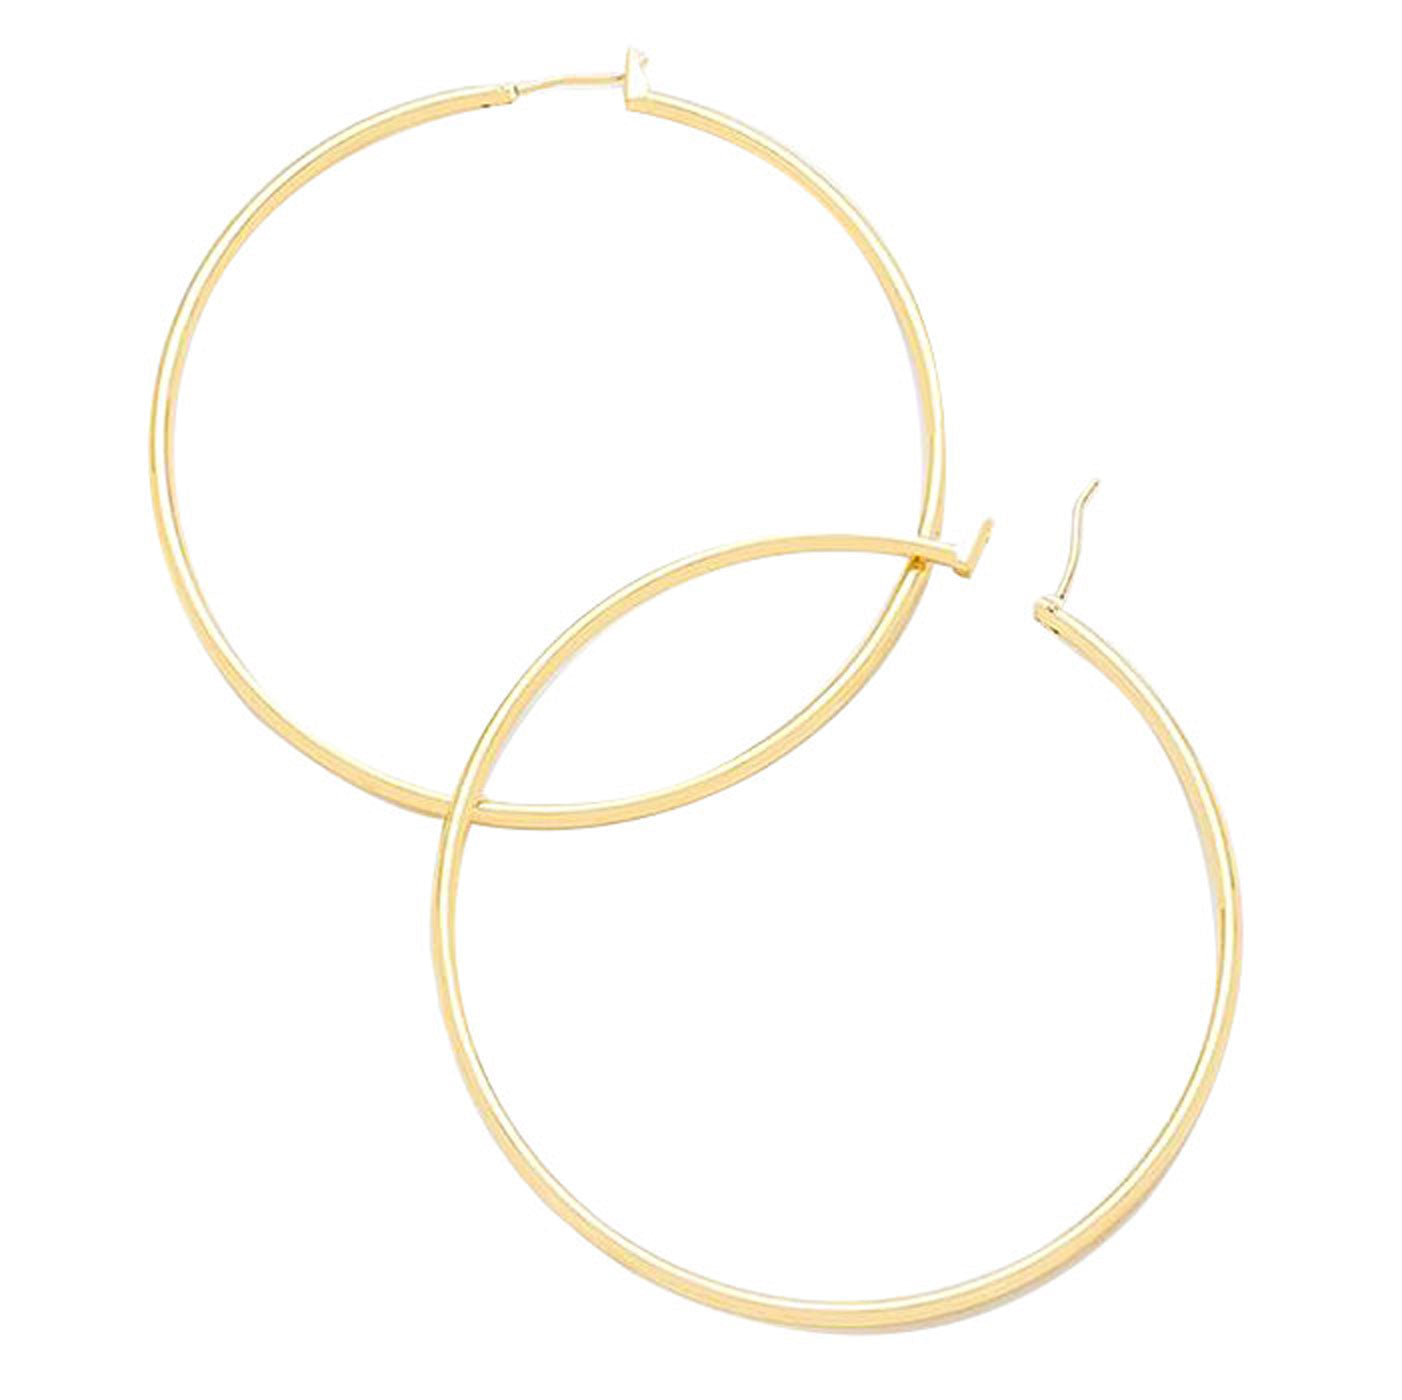 Gold 14K Gold Filled Metal Hoop Pin Catch Earrings, put on a pop of color to complete your ensemble. Beautifully crafted design adds a gorgeous glow to any outfit Perfect for adding just the right amount of shimmer & shine . Perfect for Birthday Gift, Valentine's Day Gift, Anniversary Gift, Mother's Day Gift.